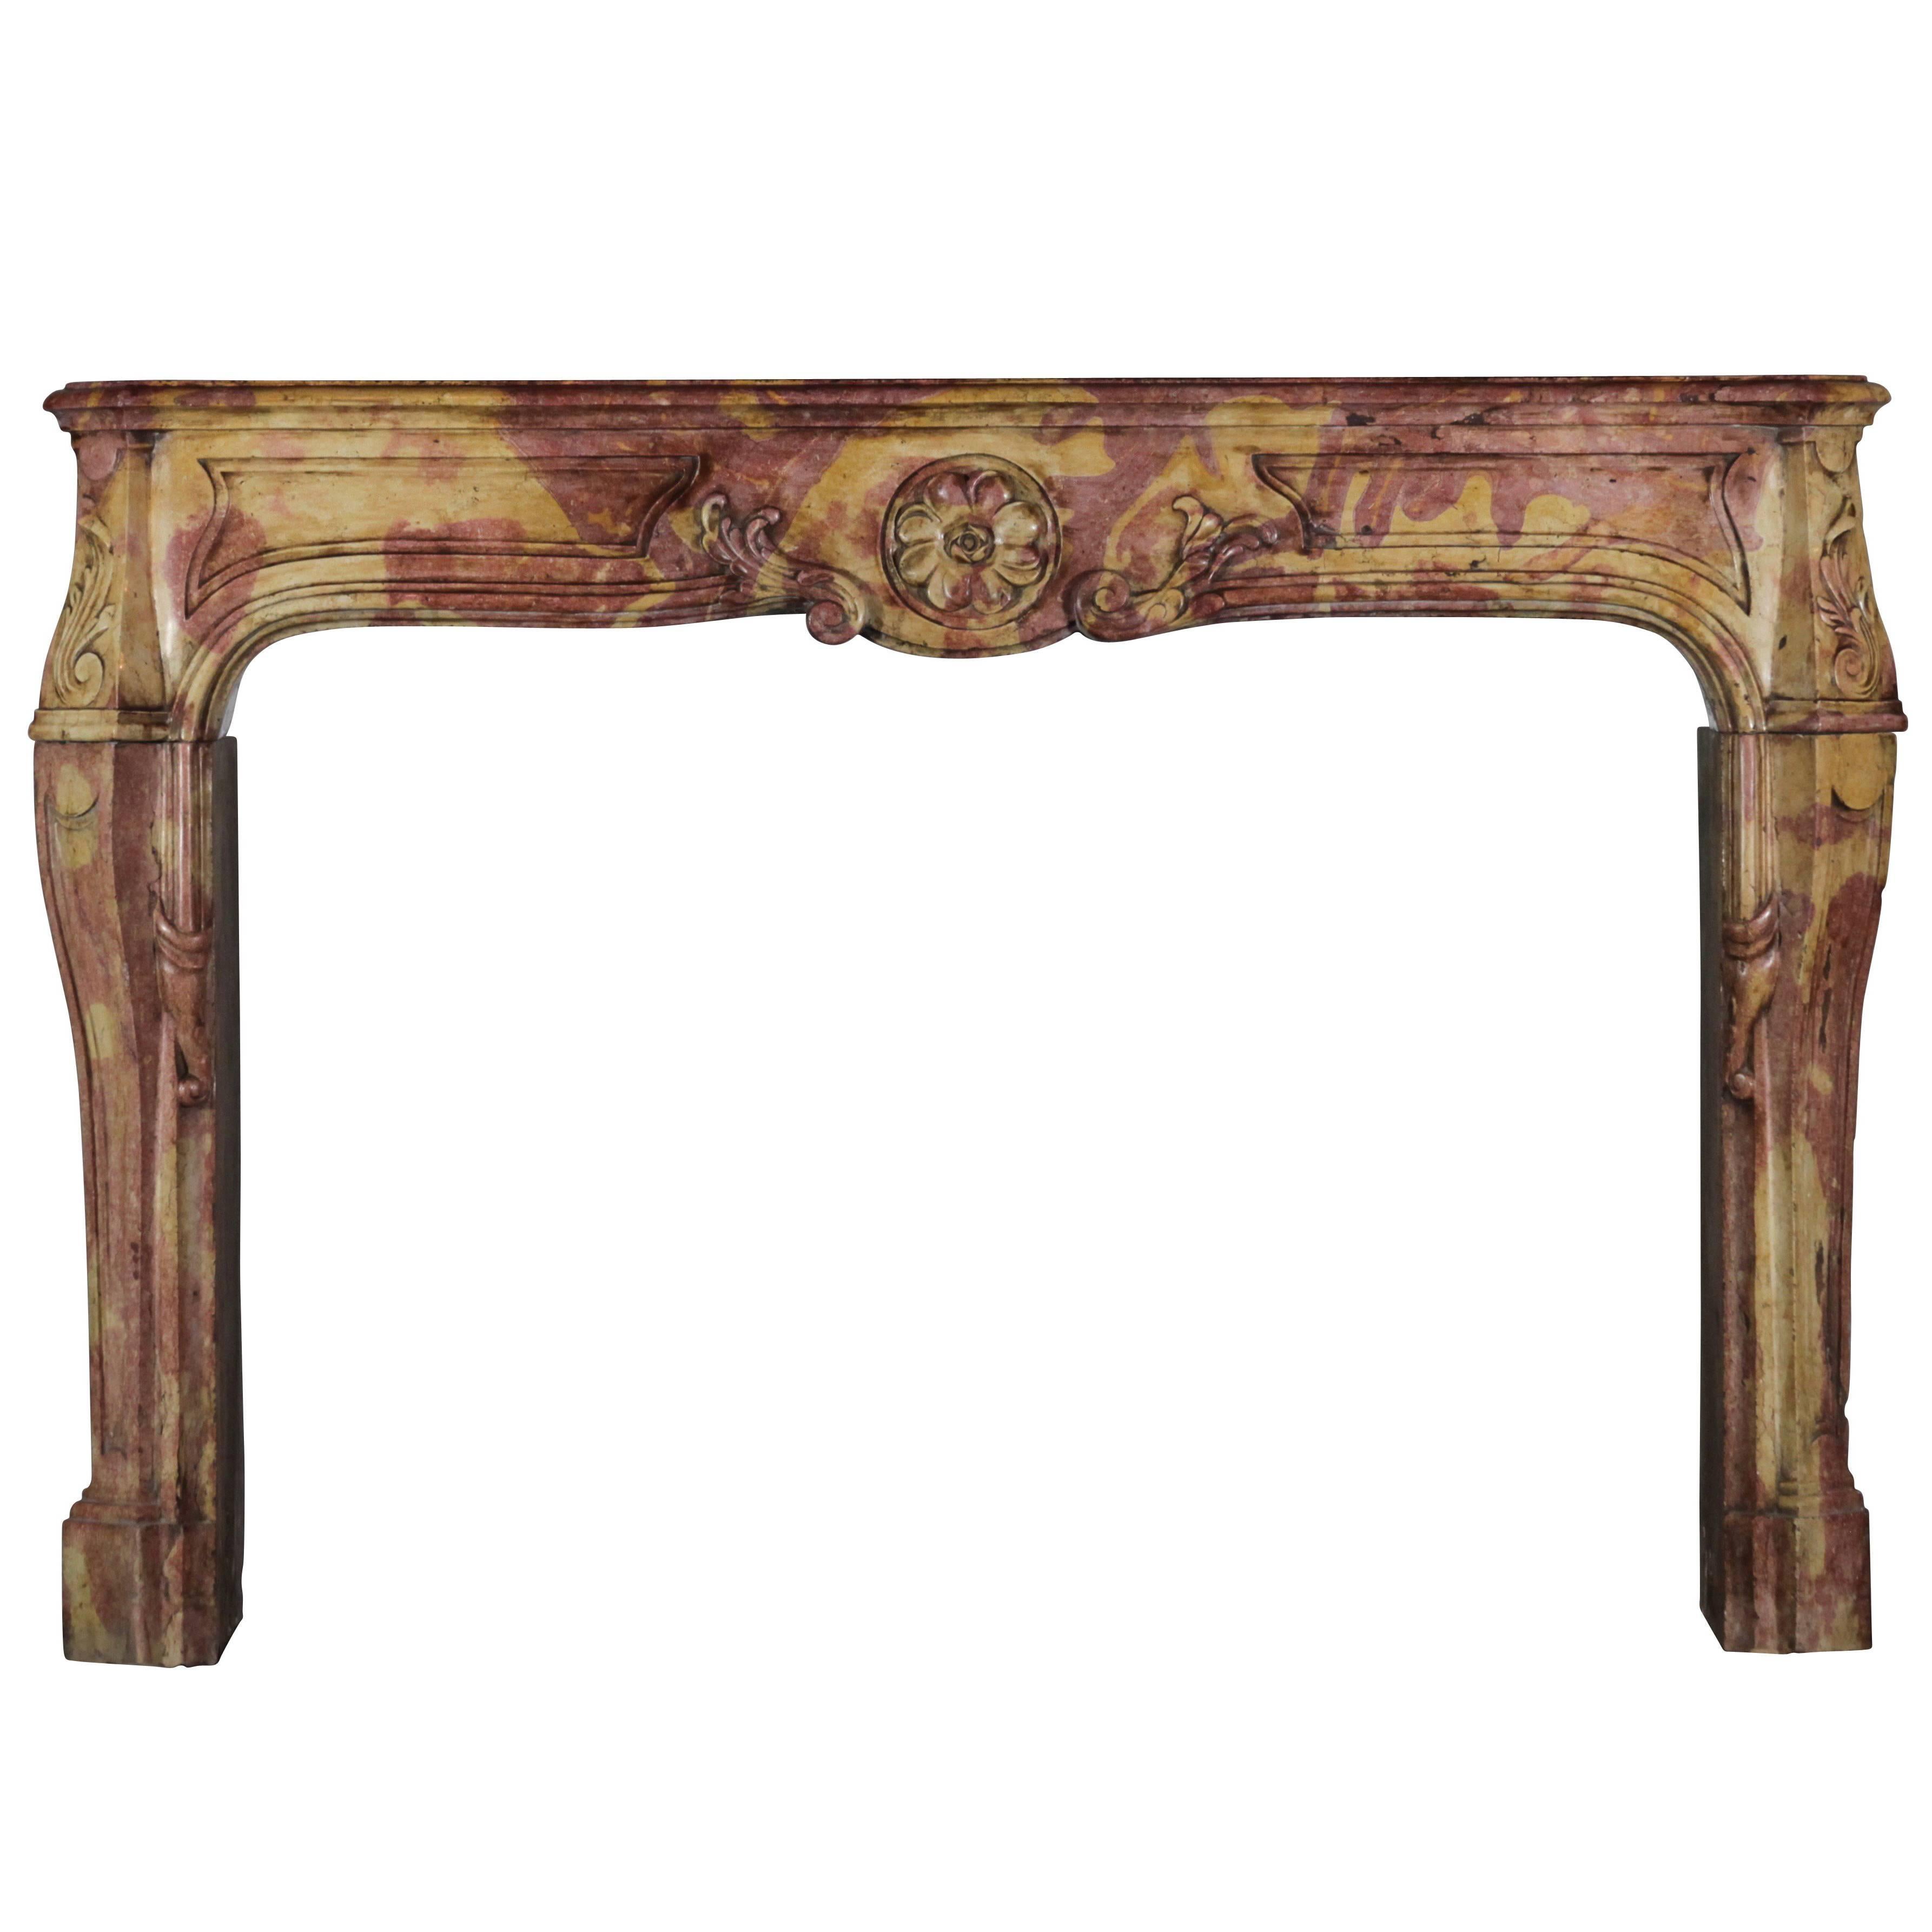 17th Century Antique Fireplace Mantle in Burgundy Hard Stone